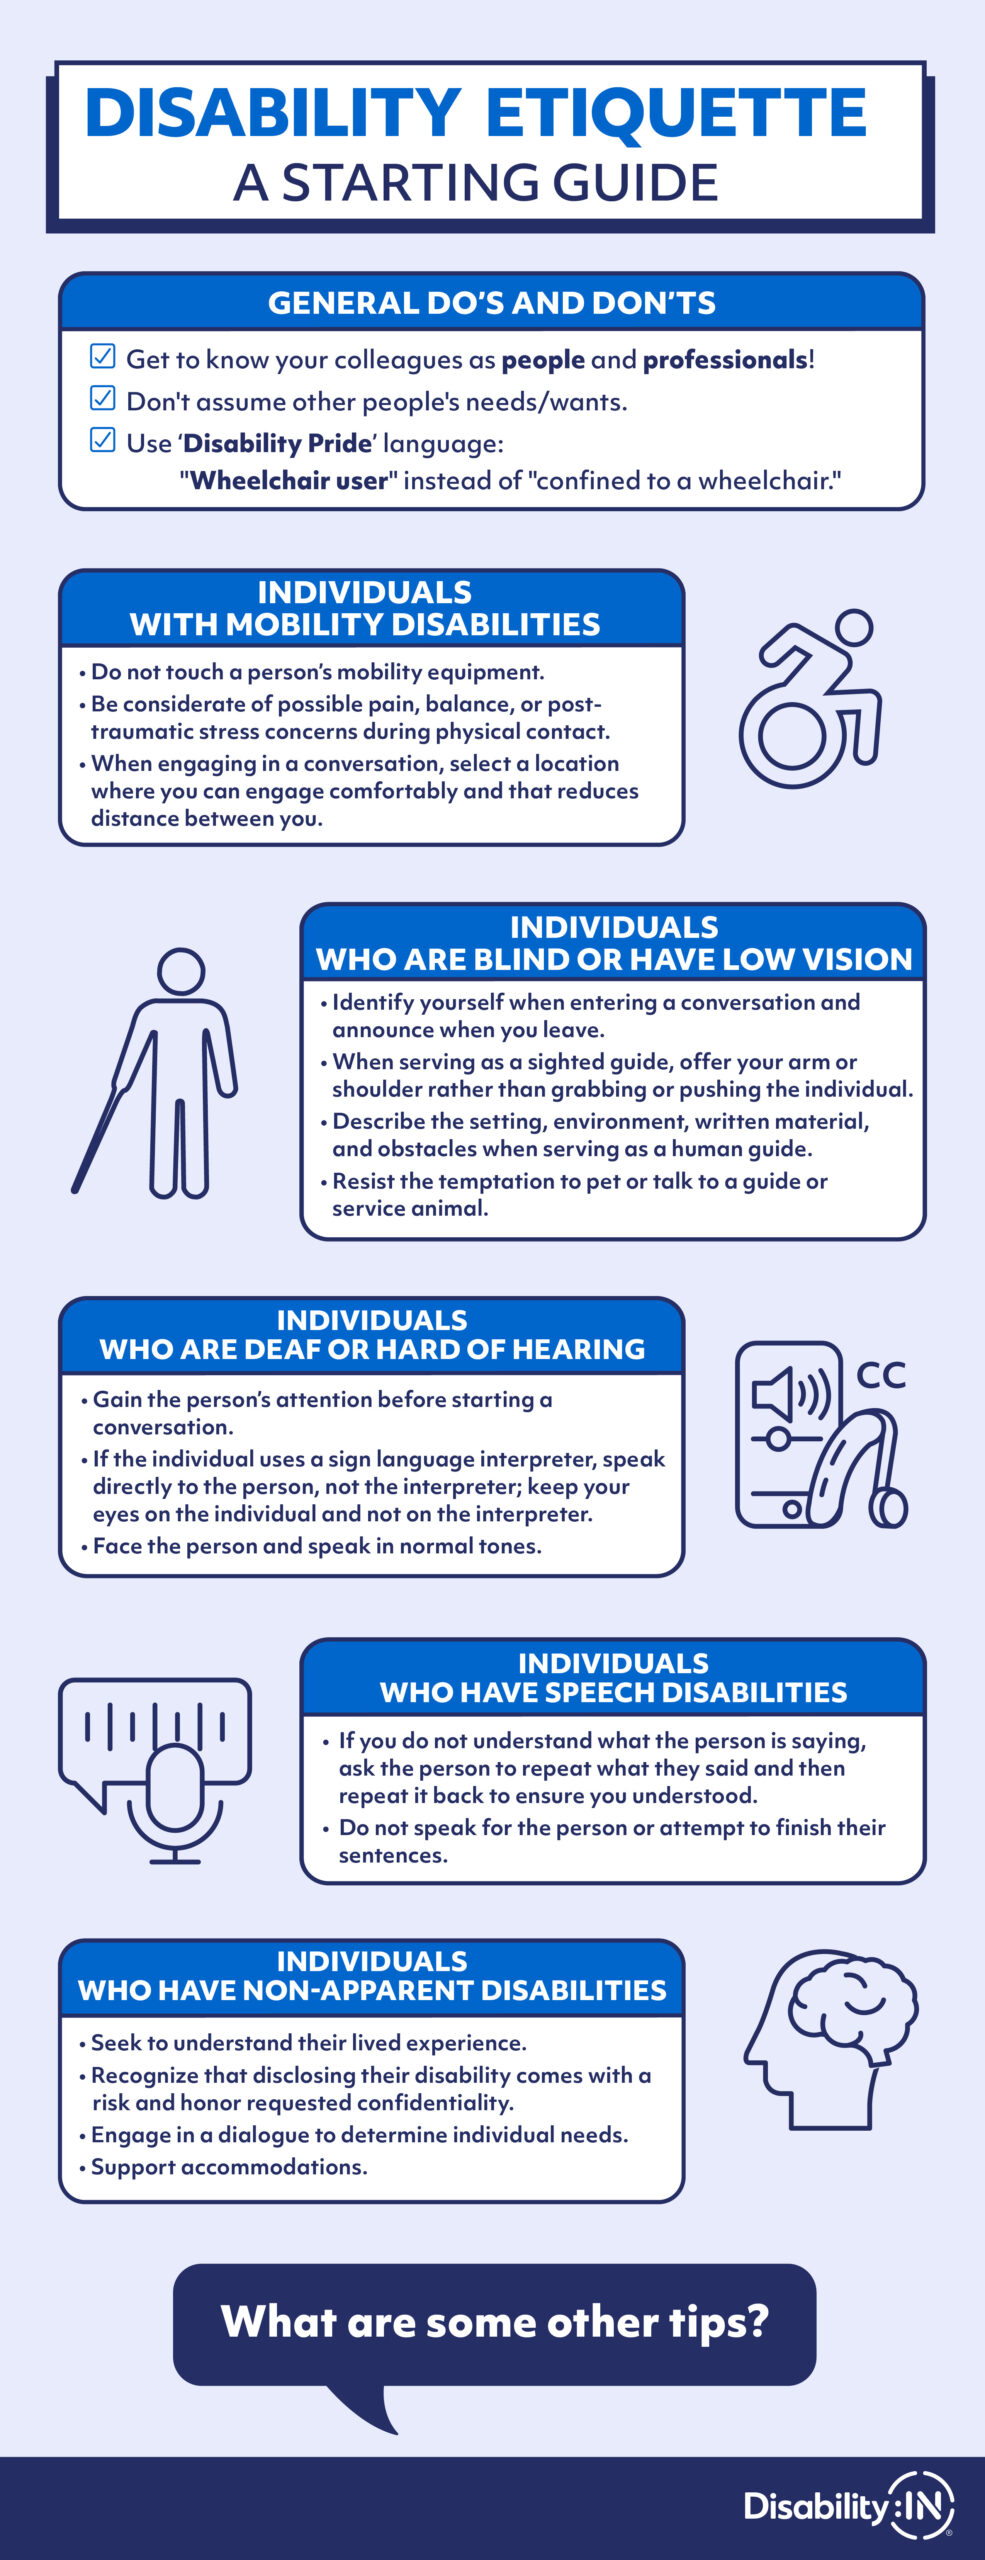 Accessible infographic found in download.